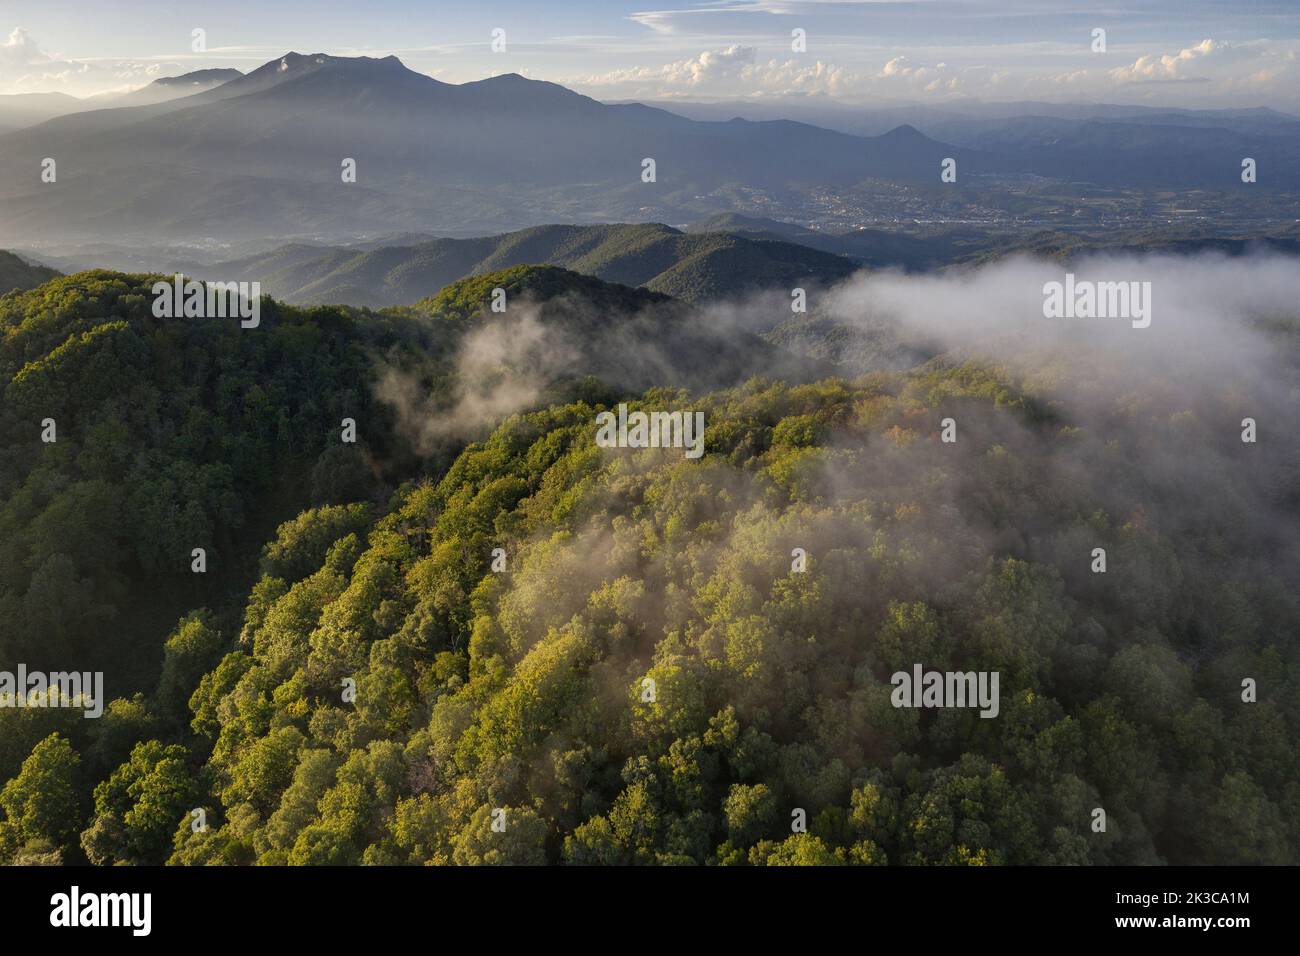 Aerial view of Montnegre mountain at sunset. In the background, the Montseny massif (Vallès Oriental, Barcelona, Catalonia, Spain) Stock Photo